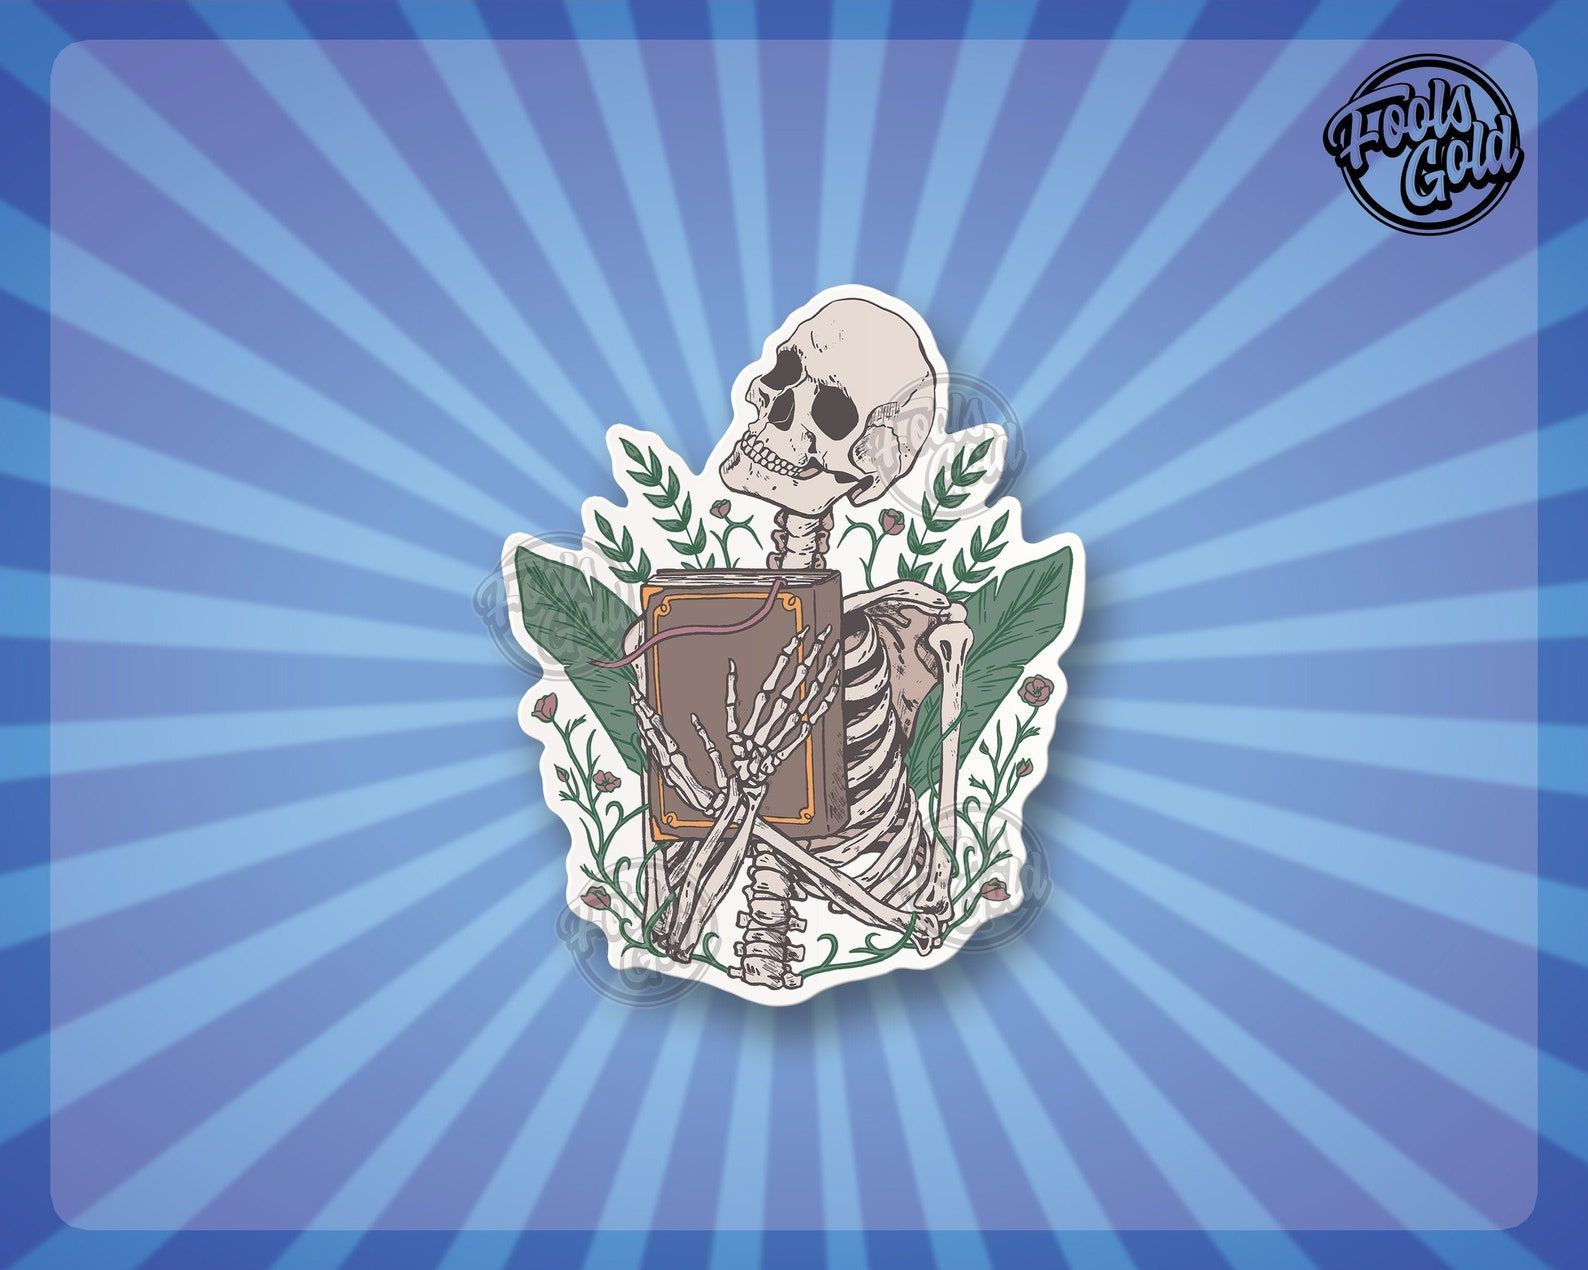 A sticker of a smoking skeleton clasping a large leather-bound book to its check against a background of flowers.